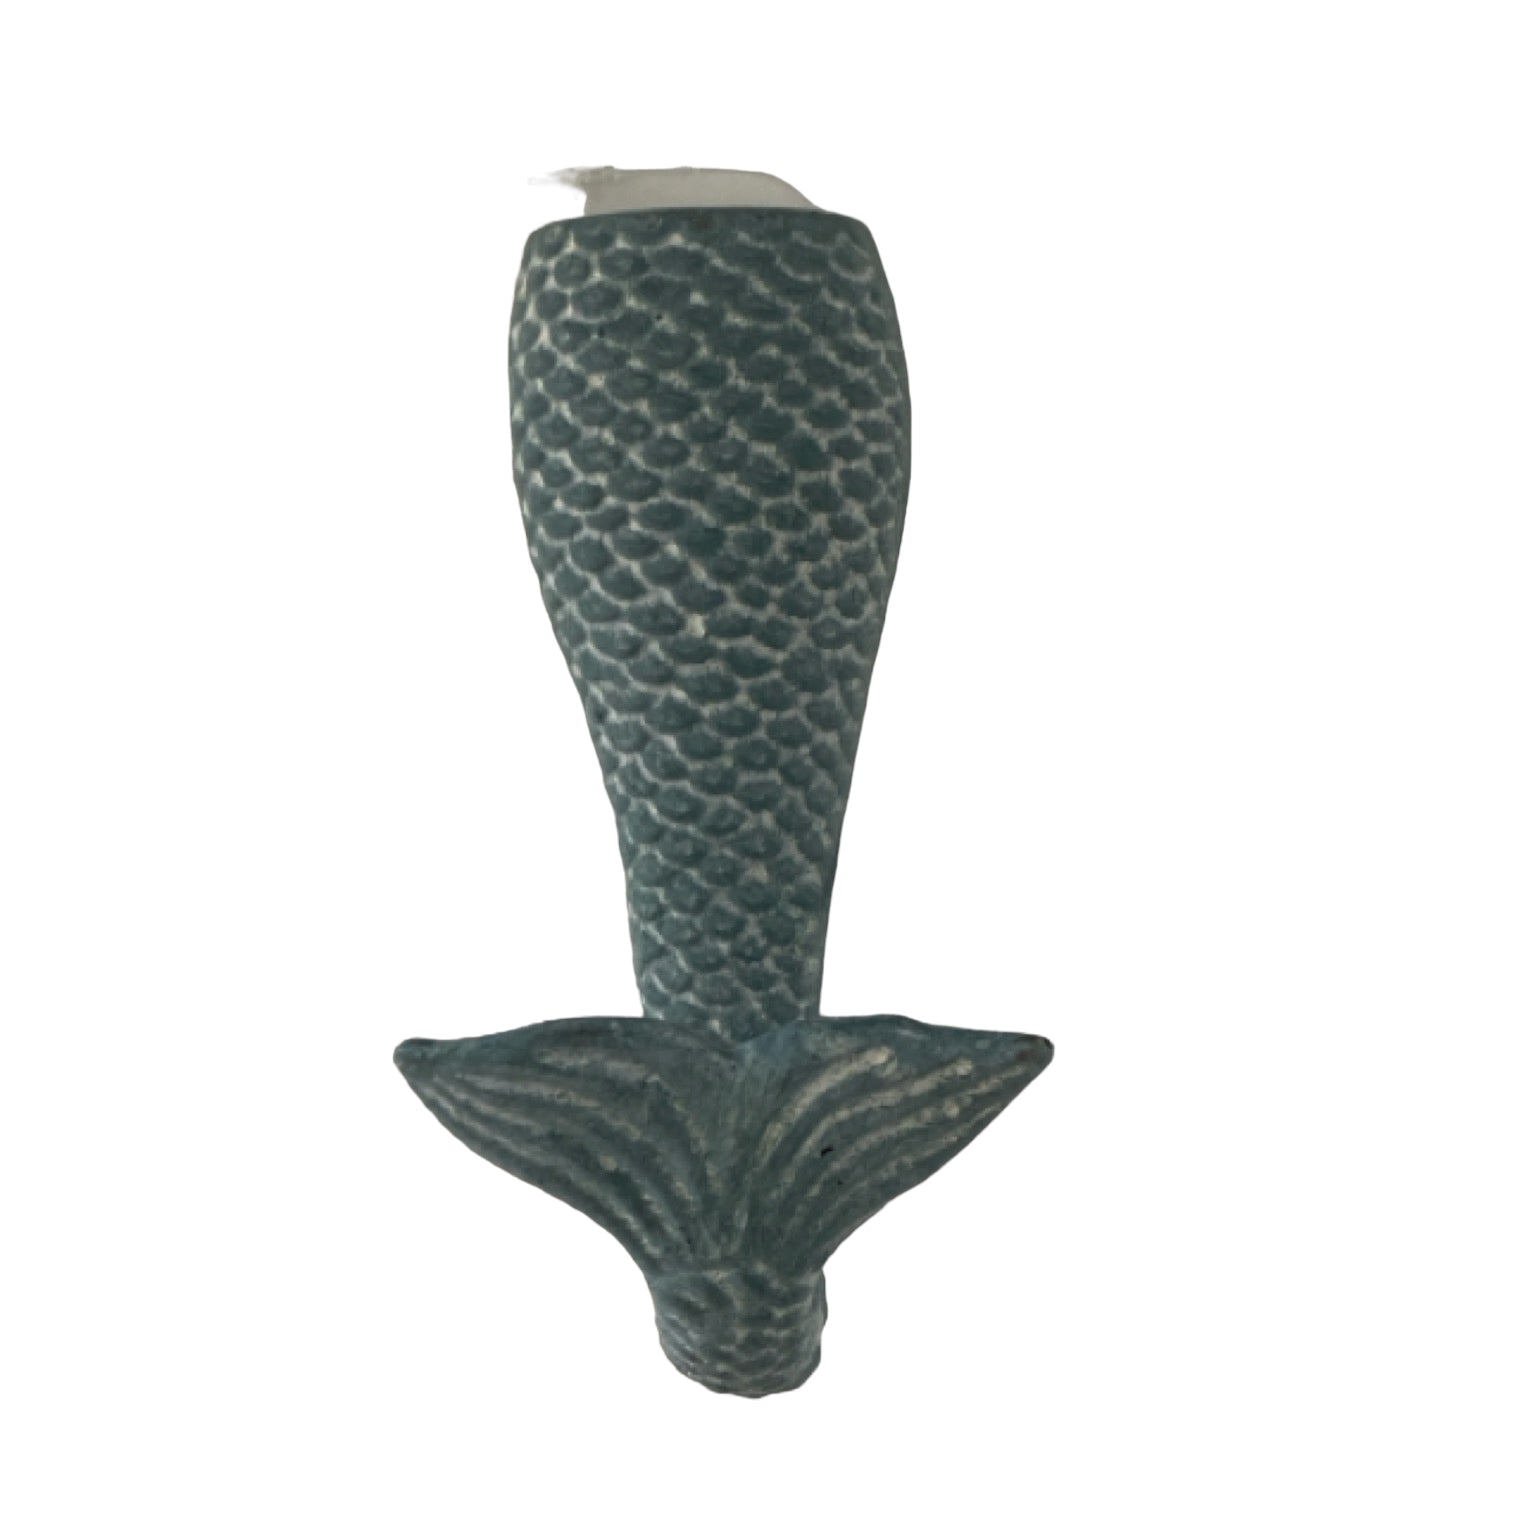 Hook Mermaid Tail Blue Beach - The Renmy Store Homewares & Gifts 